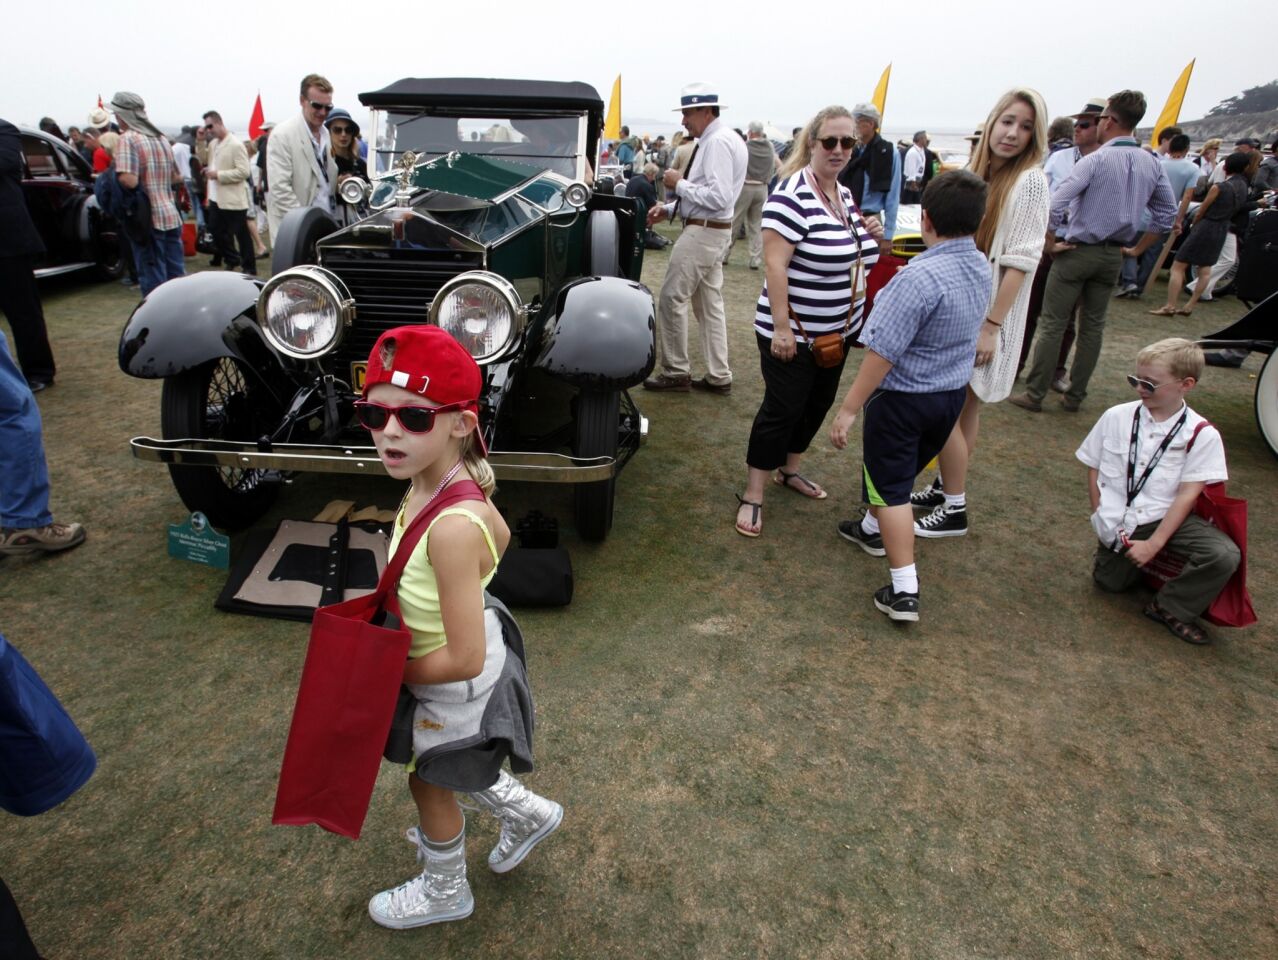 Julia Binke, 6, walks in front of a 1925 Rolls-Royce Silver Ghost at the Concours d'Elegance on Sunday.